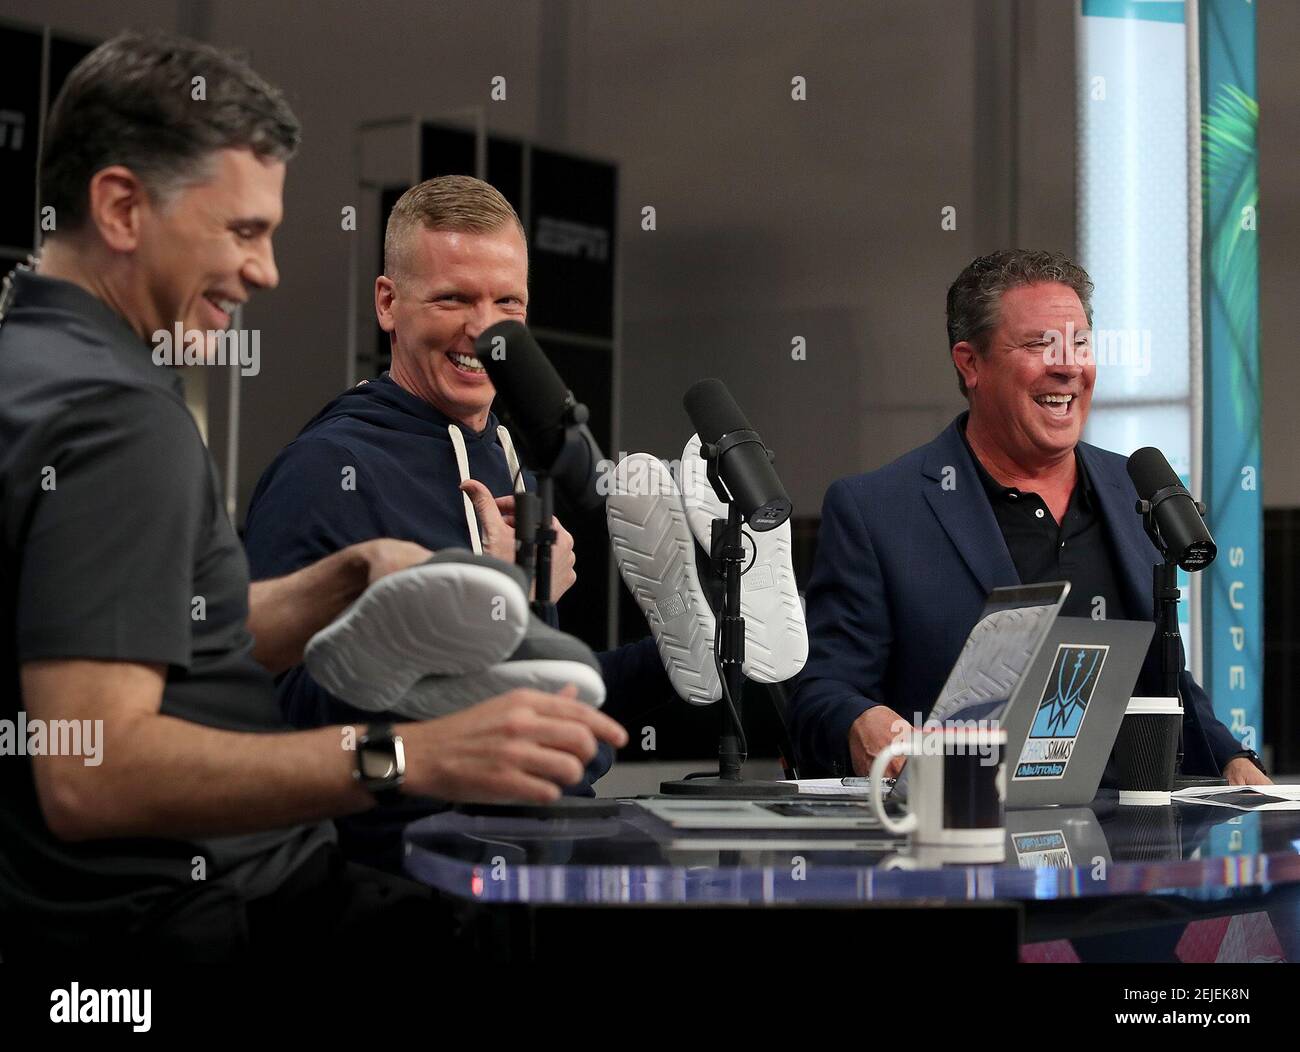 Dan Marino hands out Isotoner Slip-Ons as he is interviewed by Chris Simms  on NBC Sports Radio/NBCSN program ProFootballTalk Live. He is a  spokesperson for the company and was promoting the product.